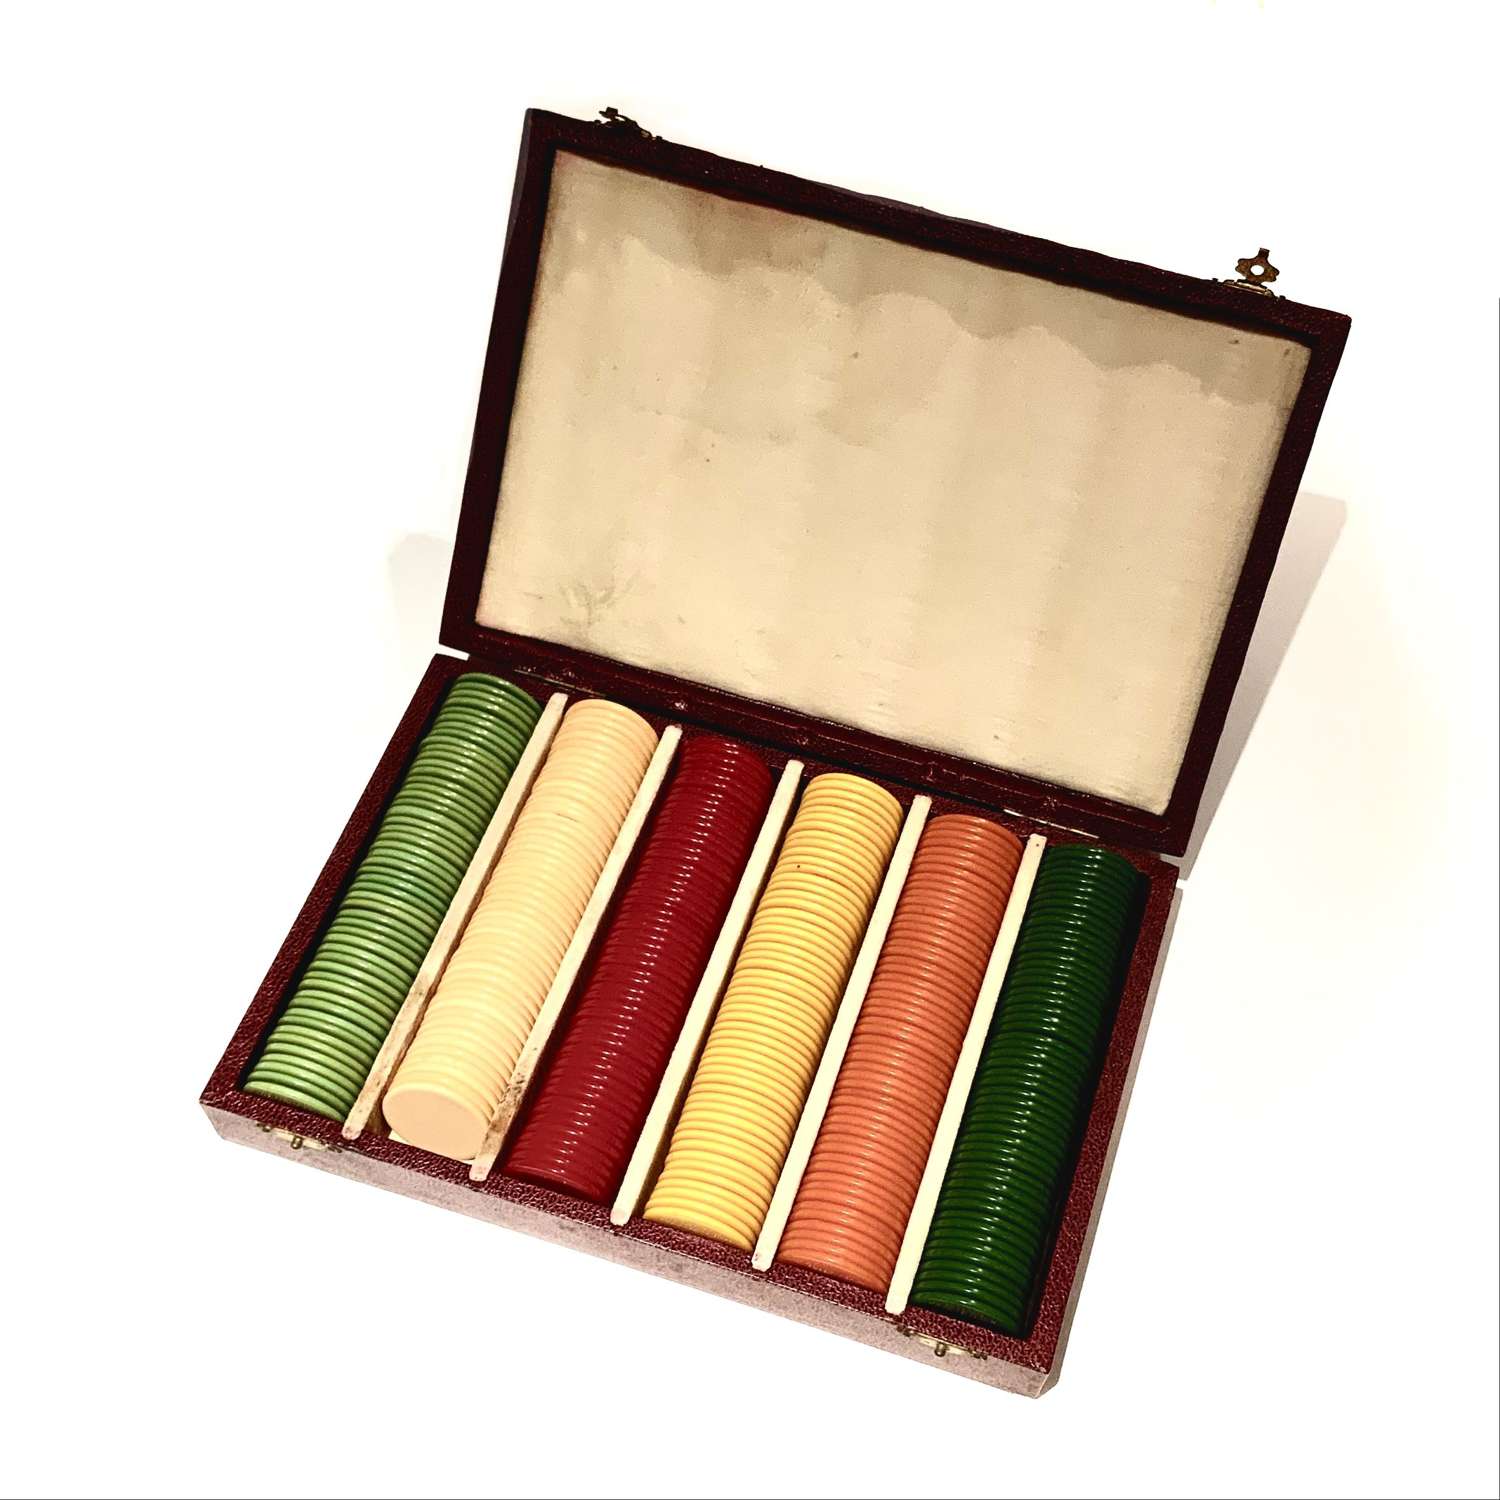 A Vintage Boxed Set of Coloured Poker Chips or Gaming Counters